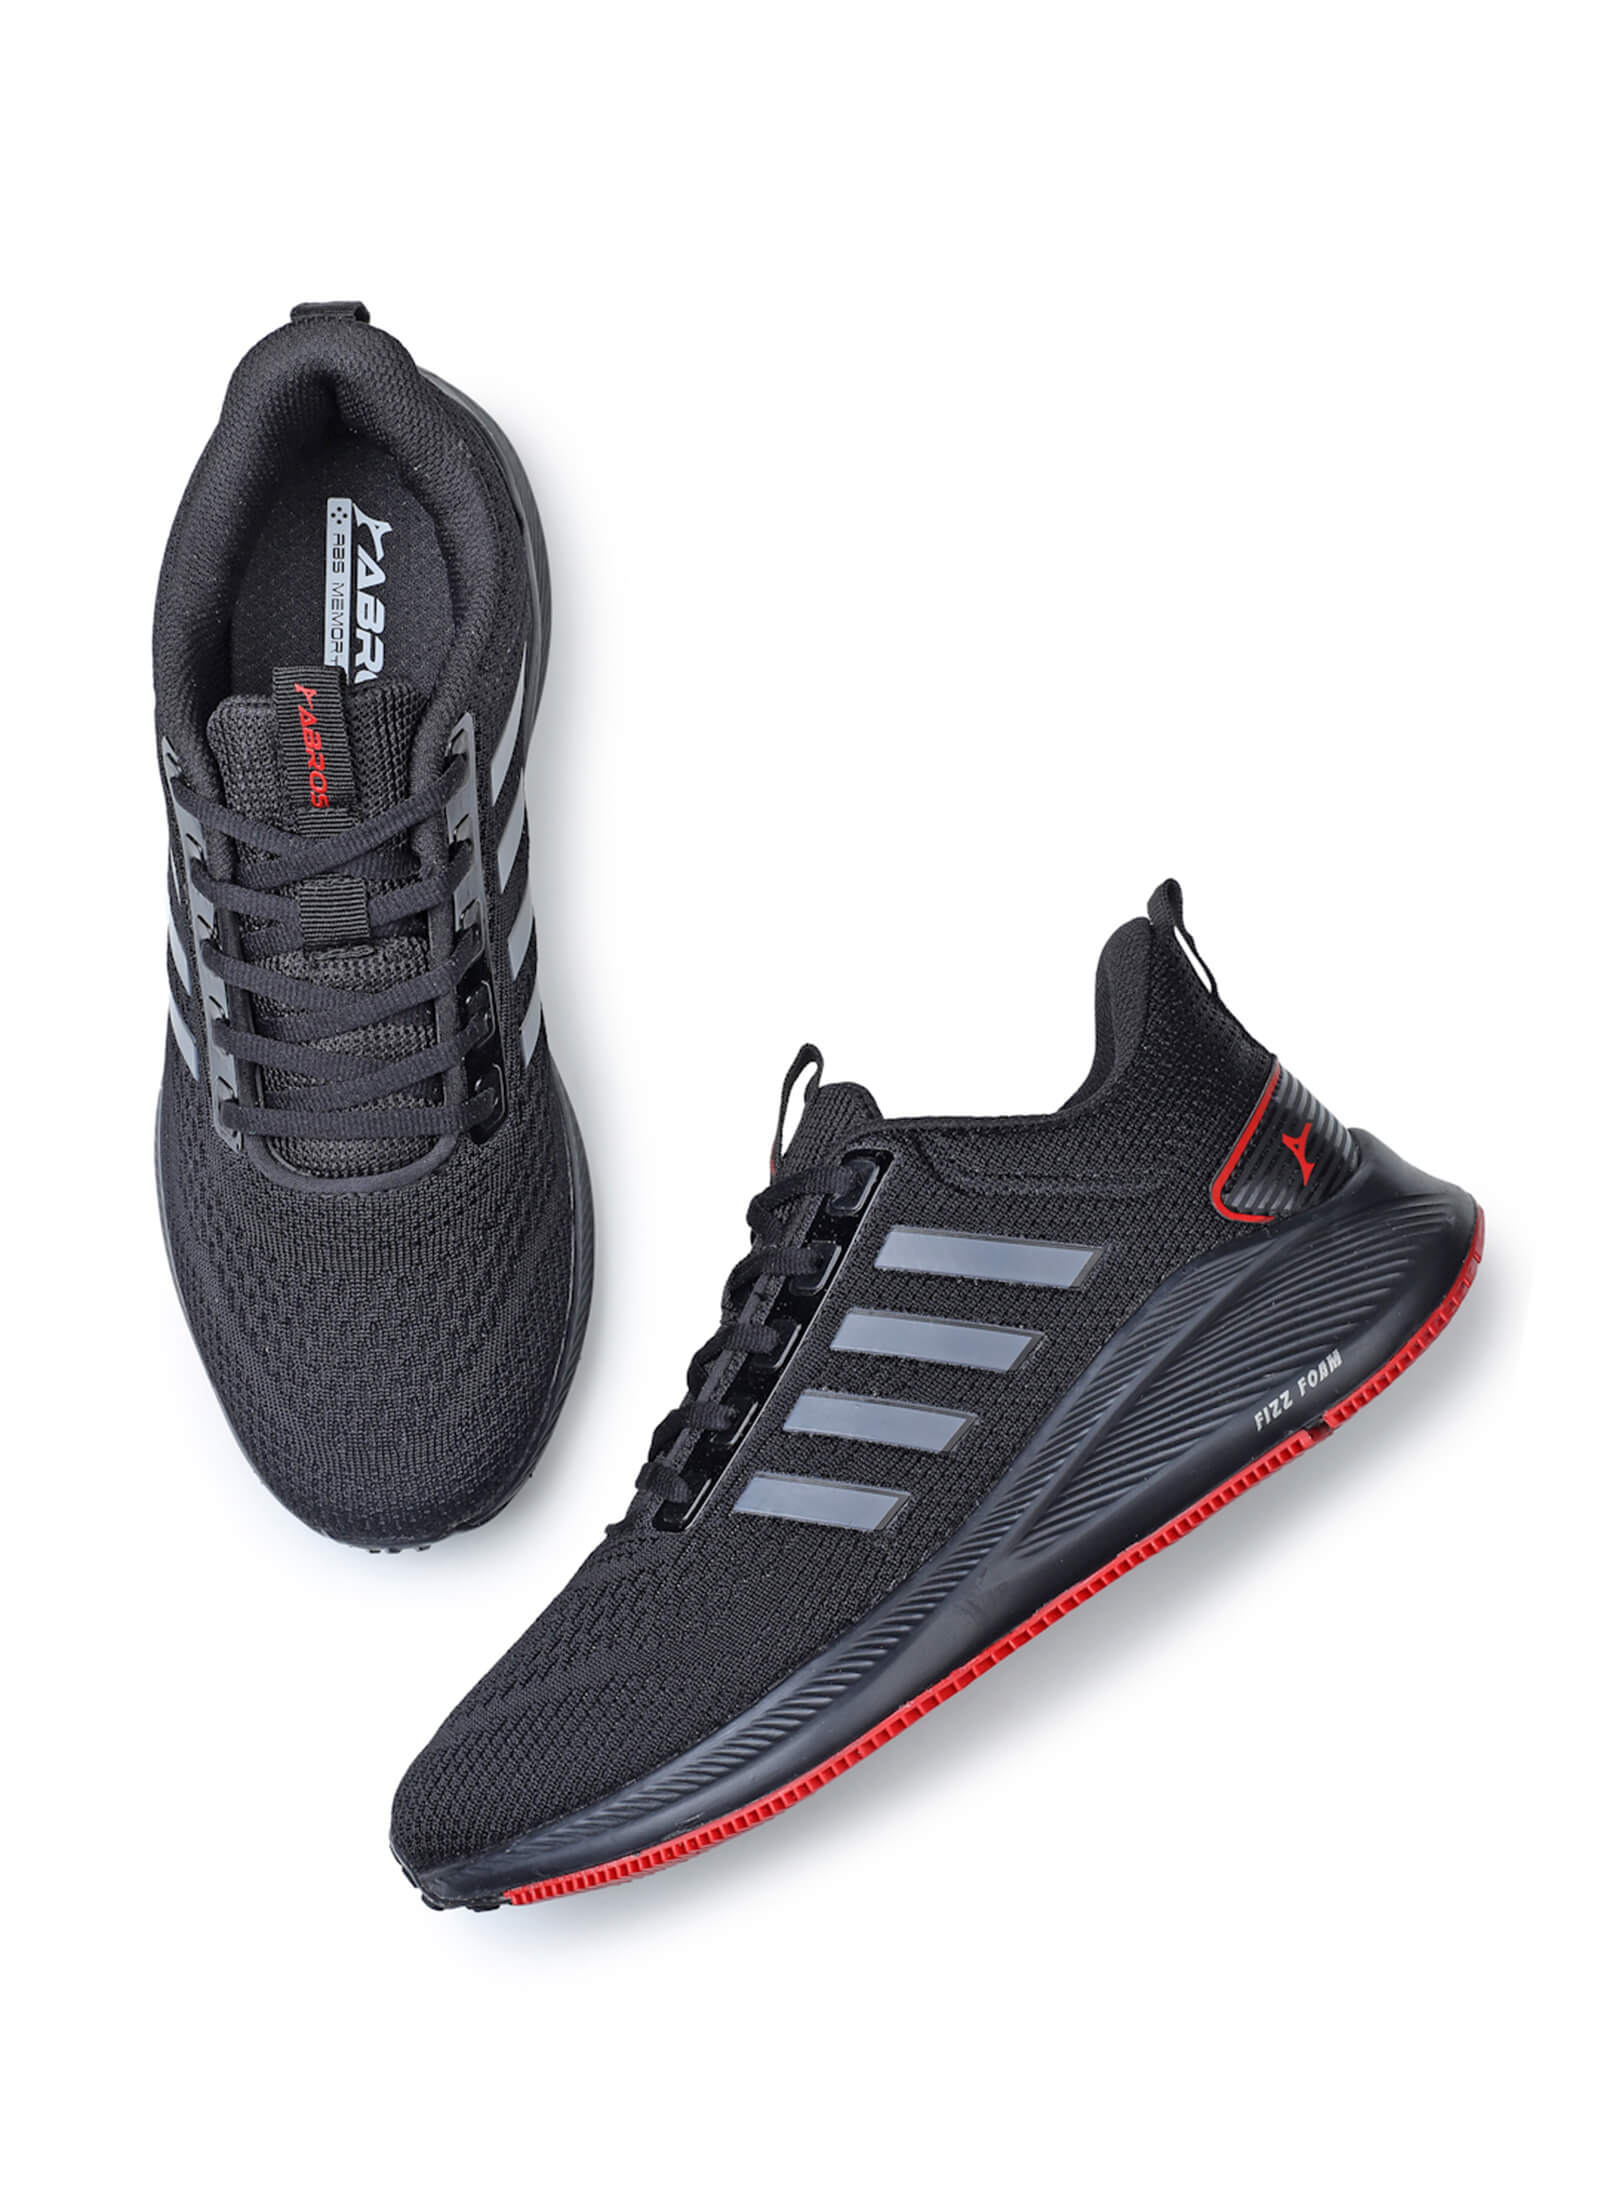 Racer Lightweight Anti-Skid Sports Shoes for Men